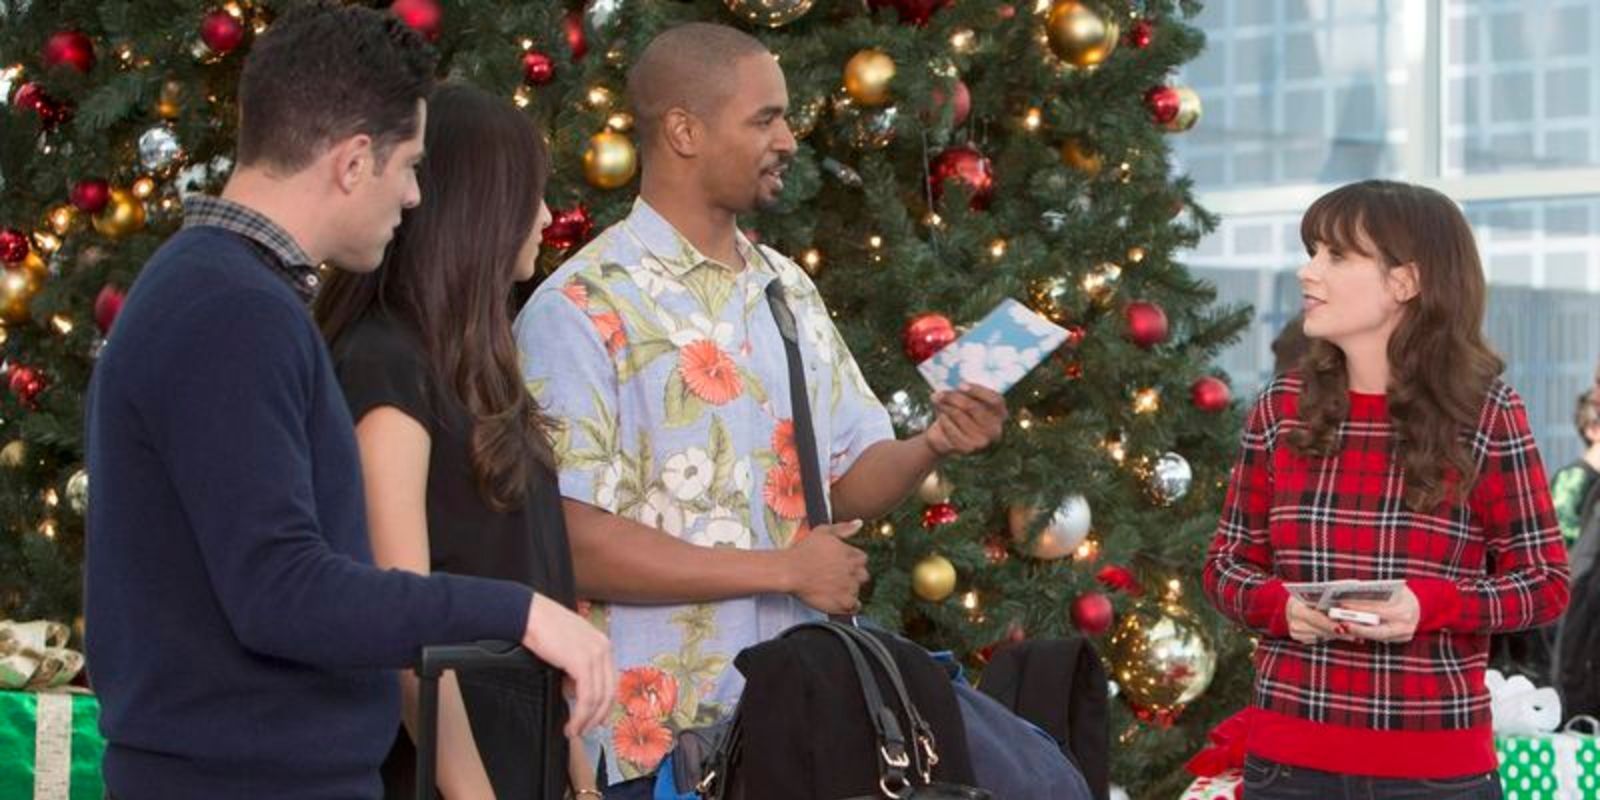 Schmidt, Cece, Coach, and Jess talk in front of a Christmas tree in the New Girls episode "LAXmas"